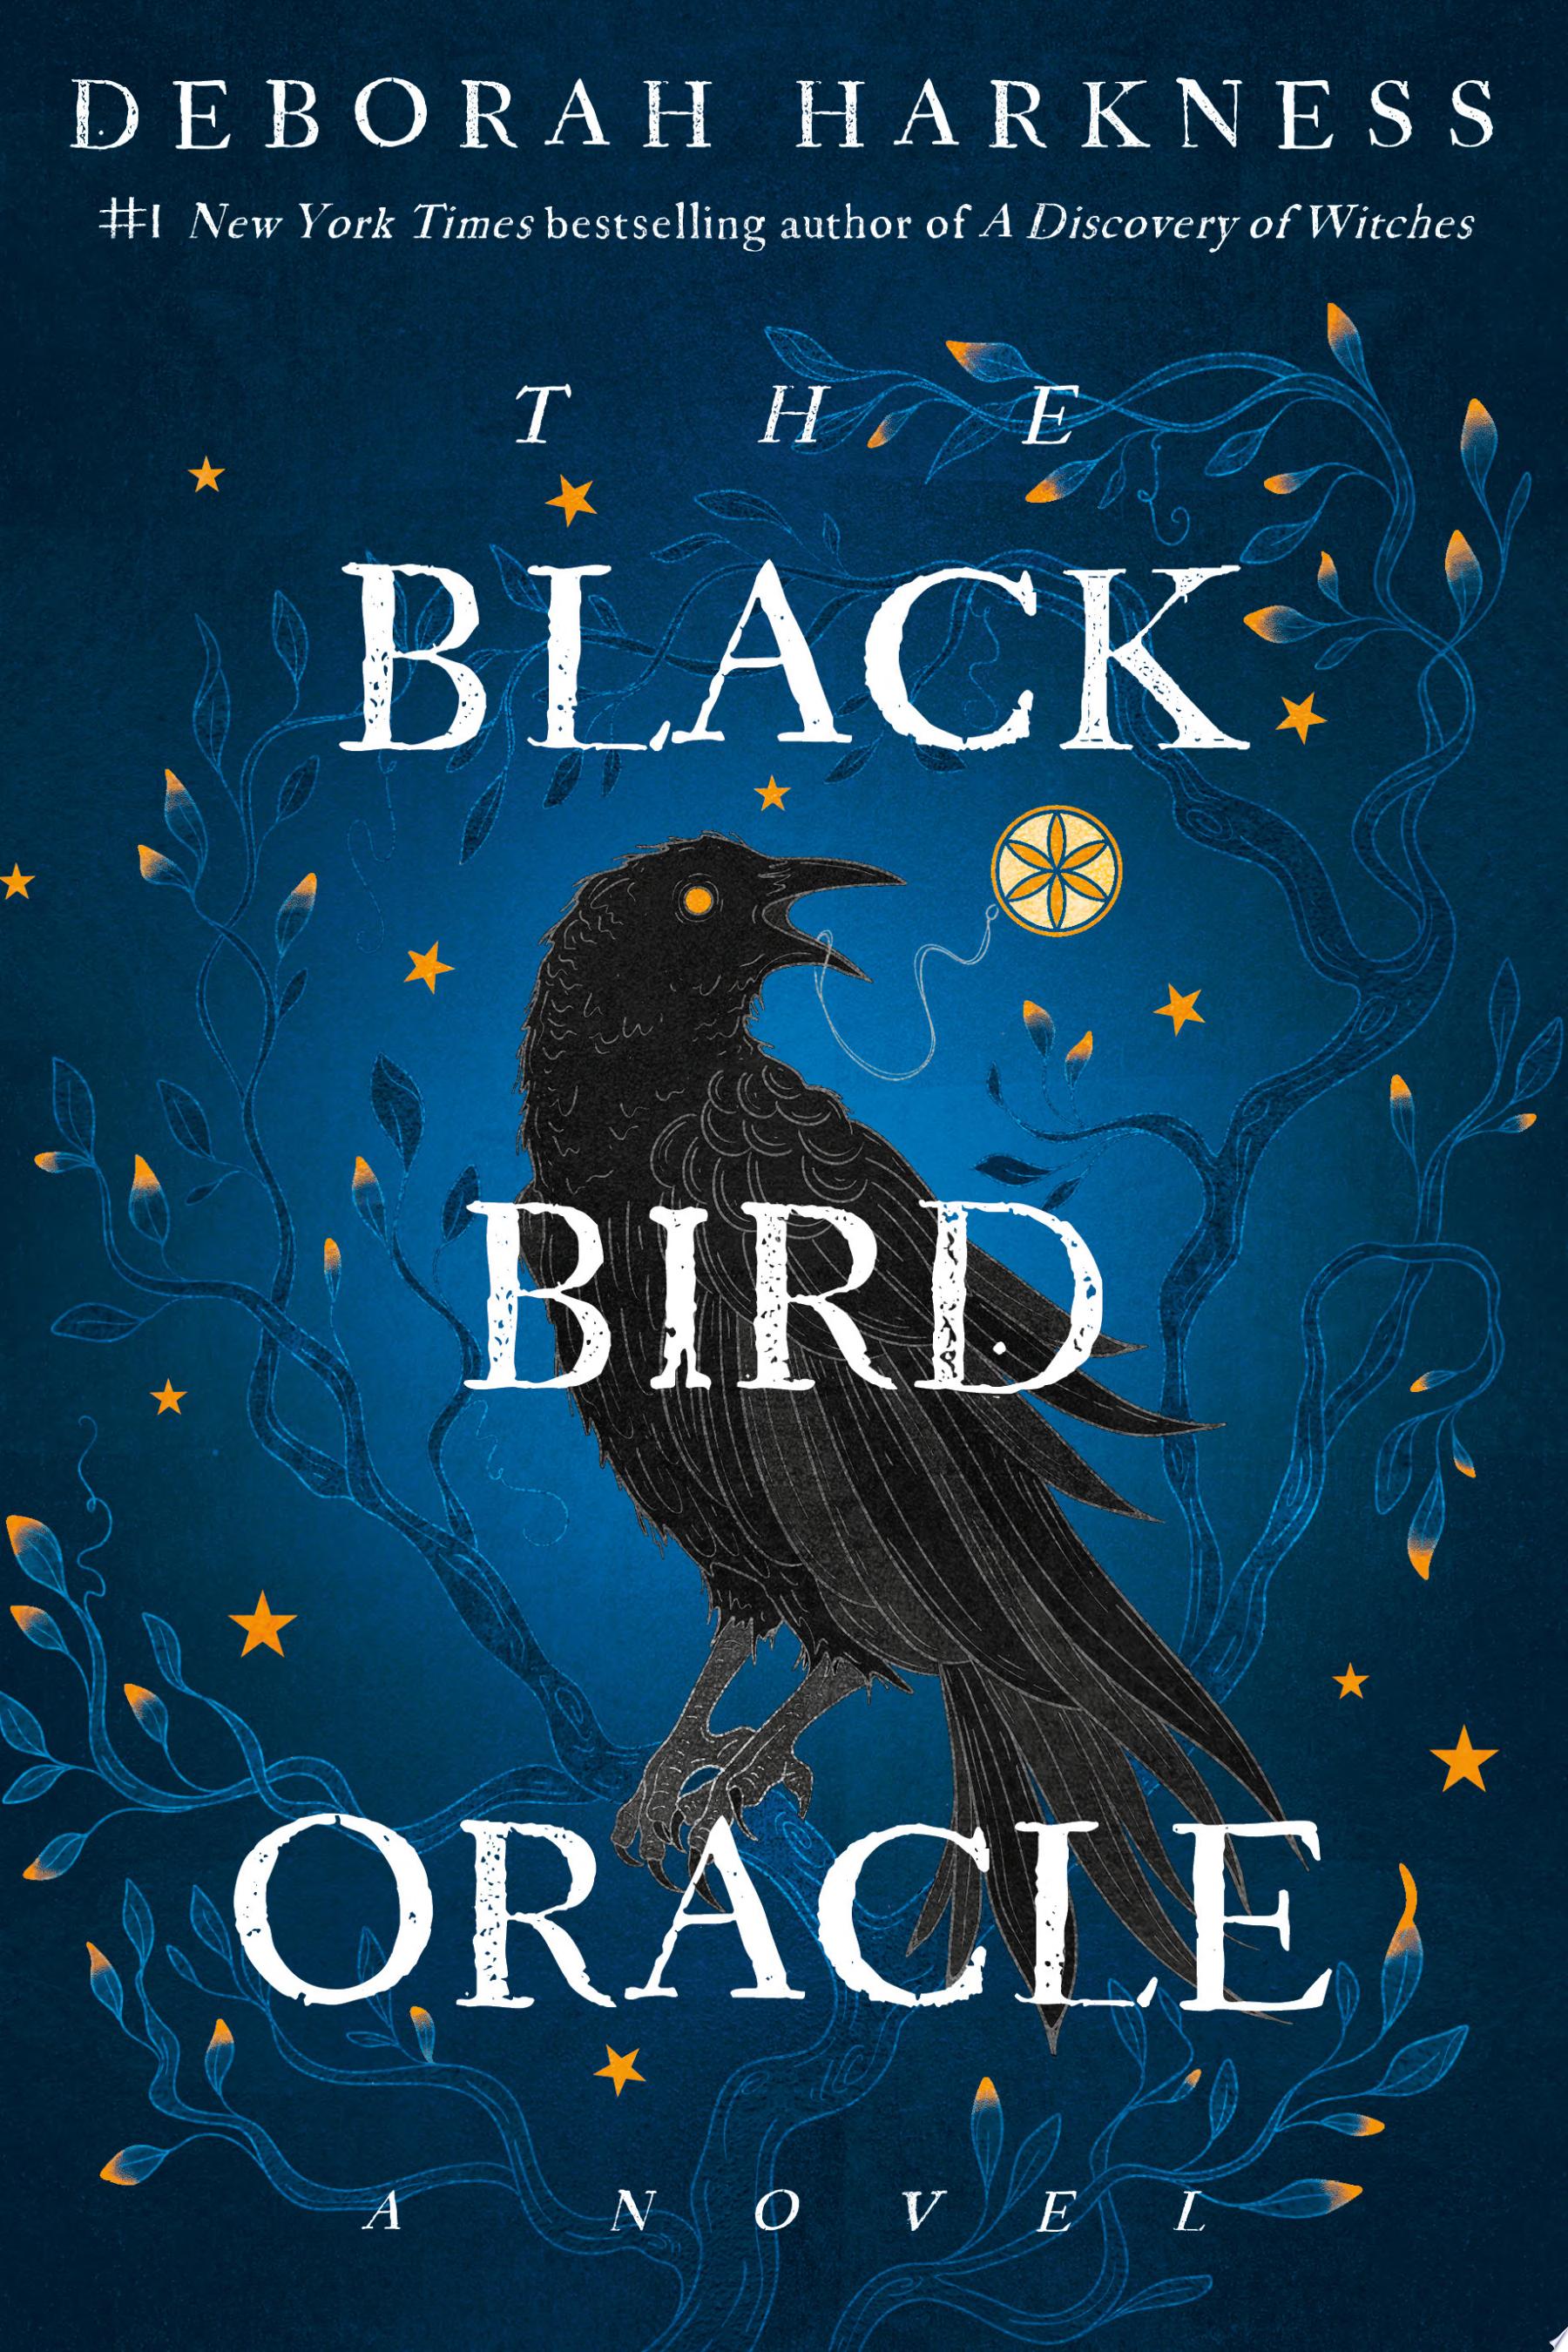 Image for "The Black Bird Oracle"